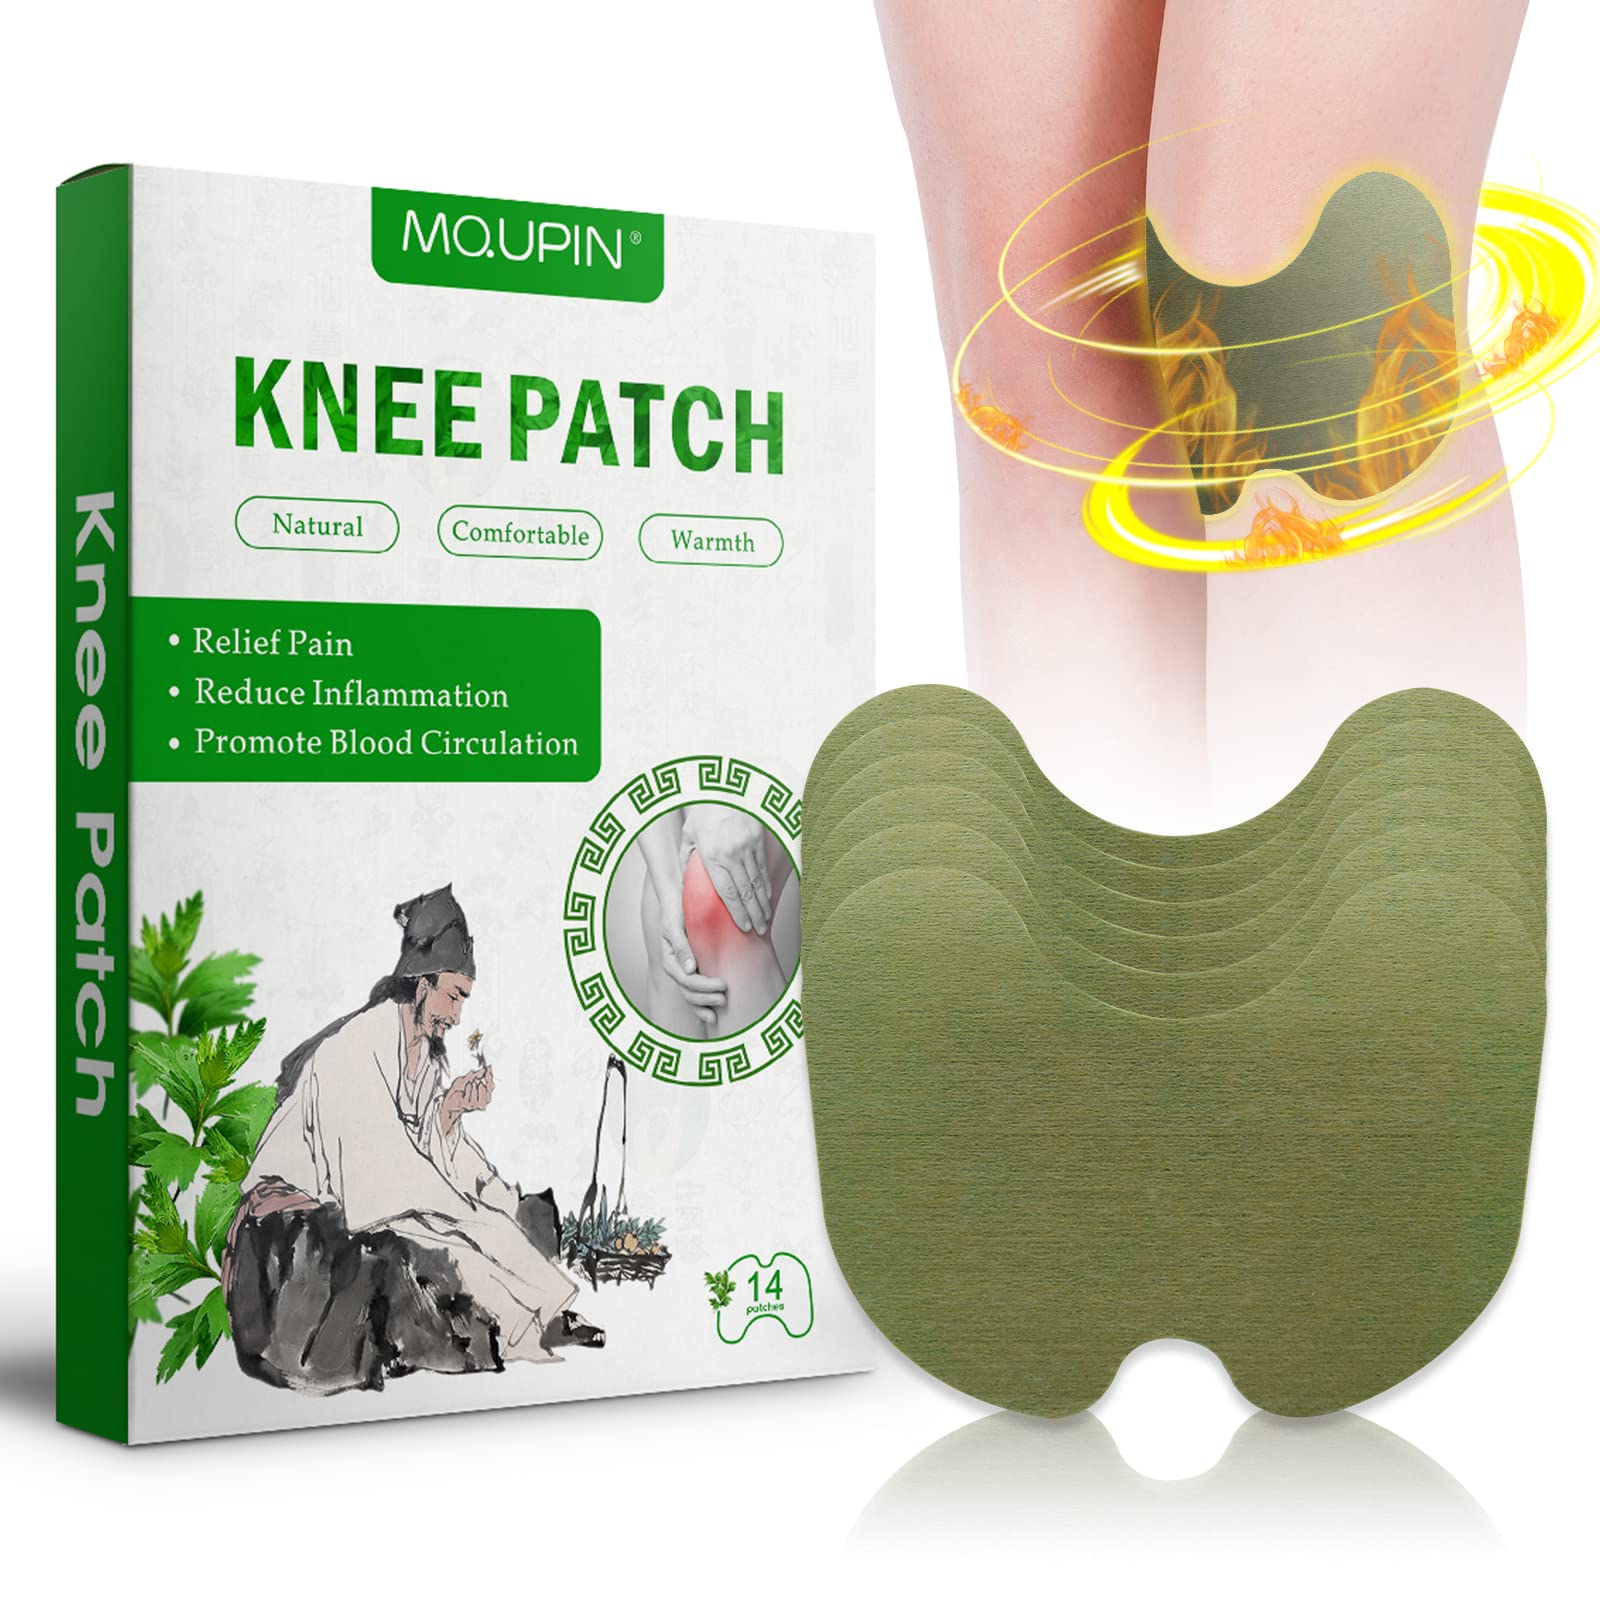 MQUPIN Knee Pain Relief Patches, Wormwood Pain Relief Patches